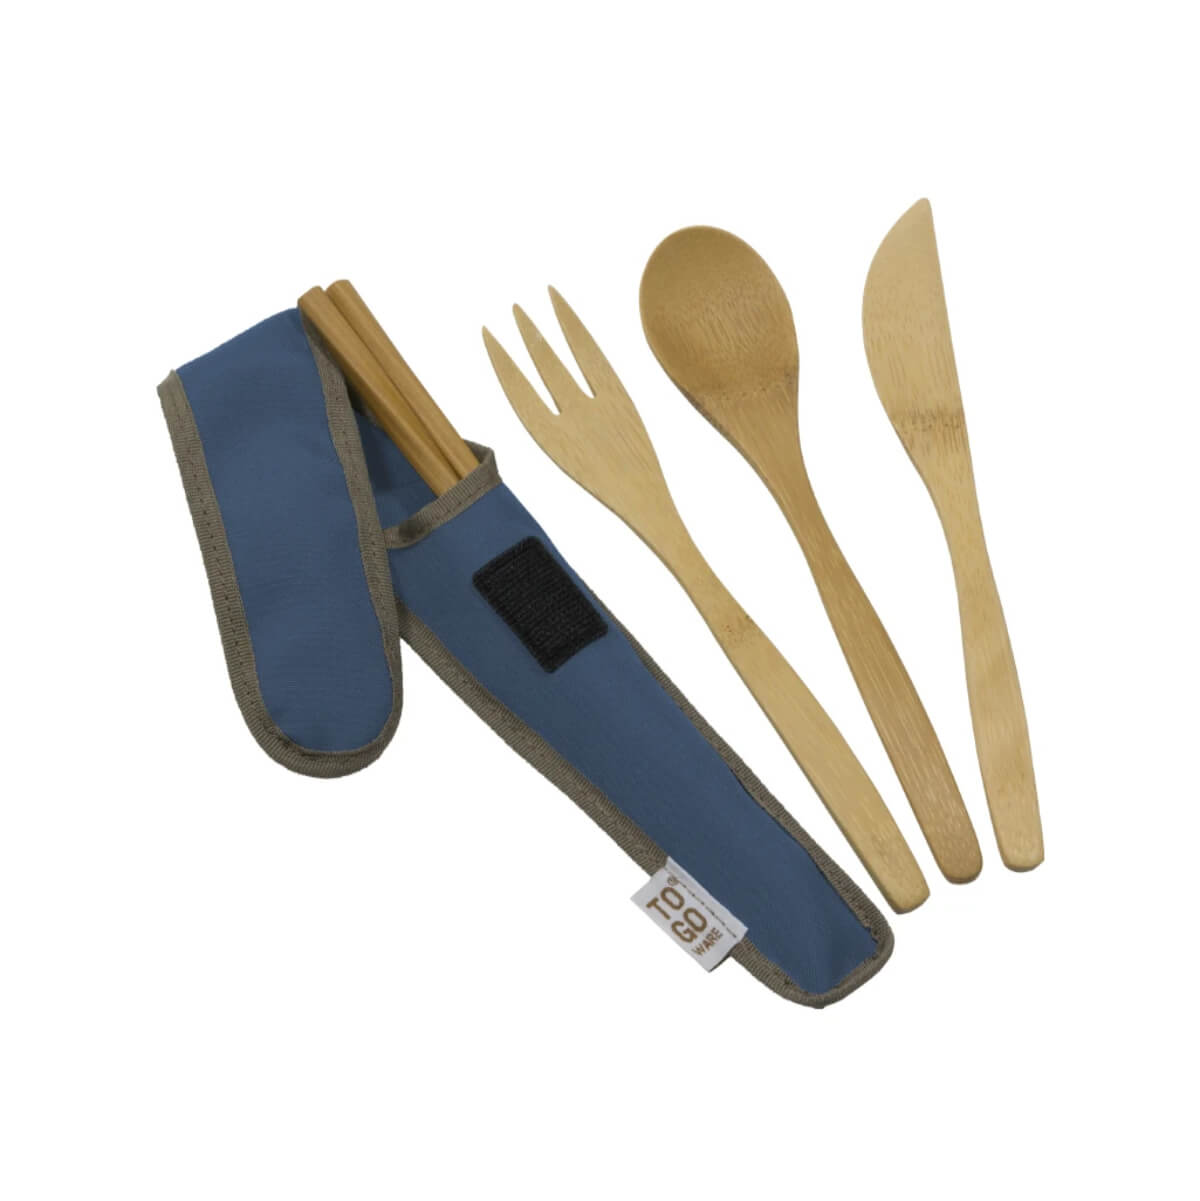 Bamboo cutlery for camping